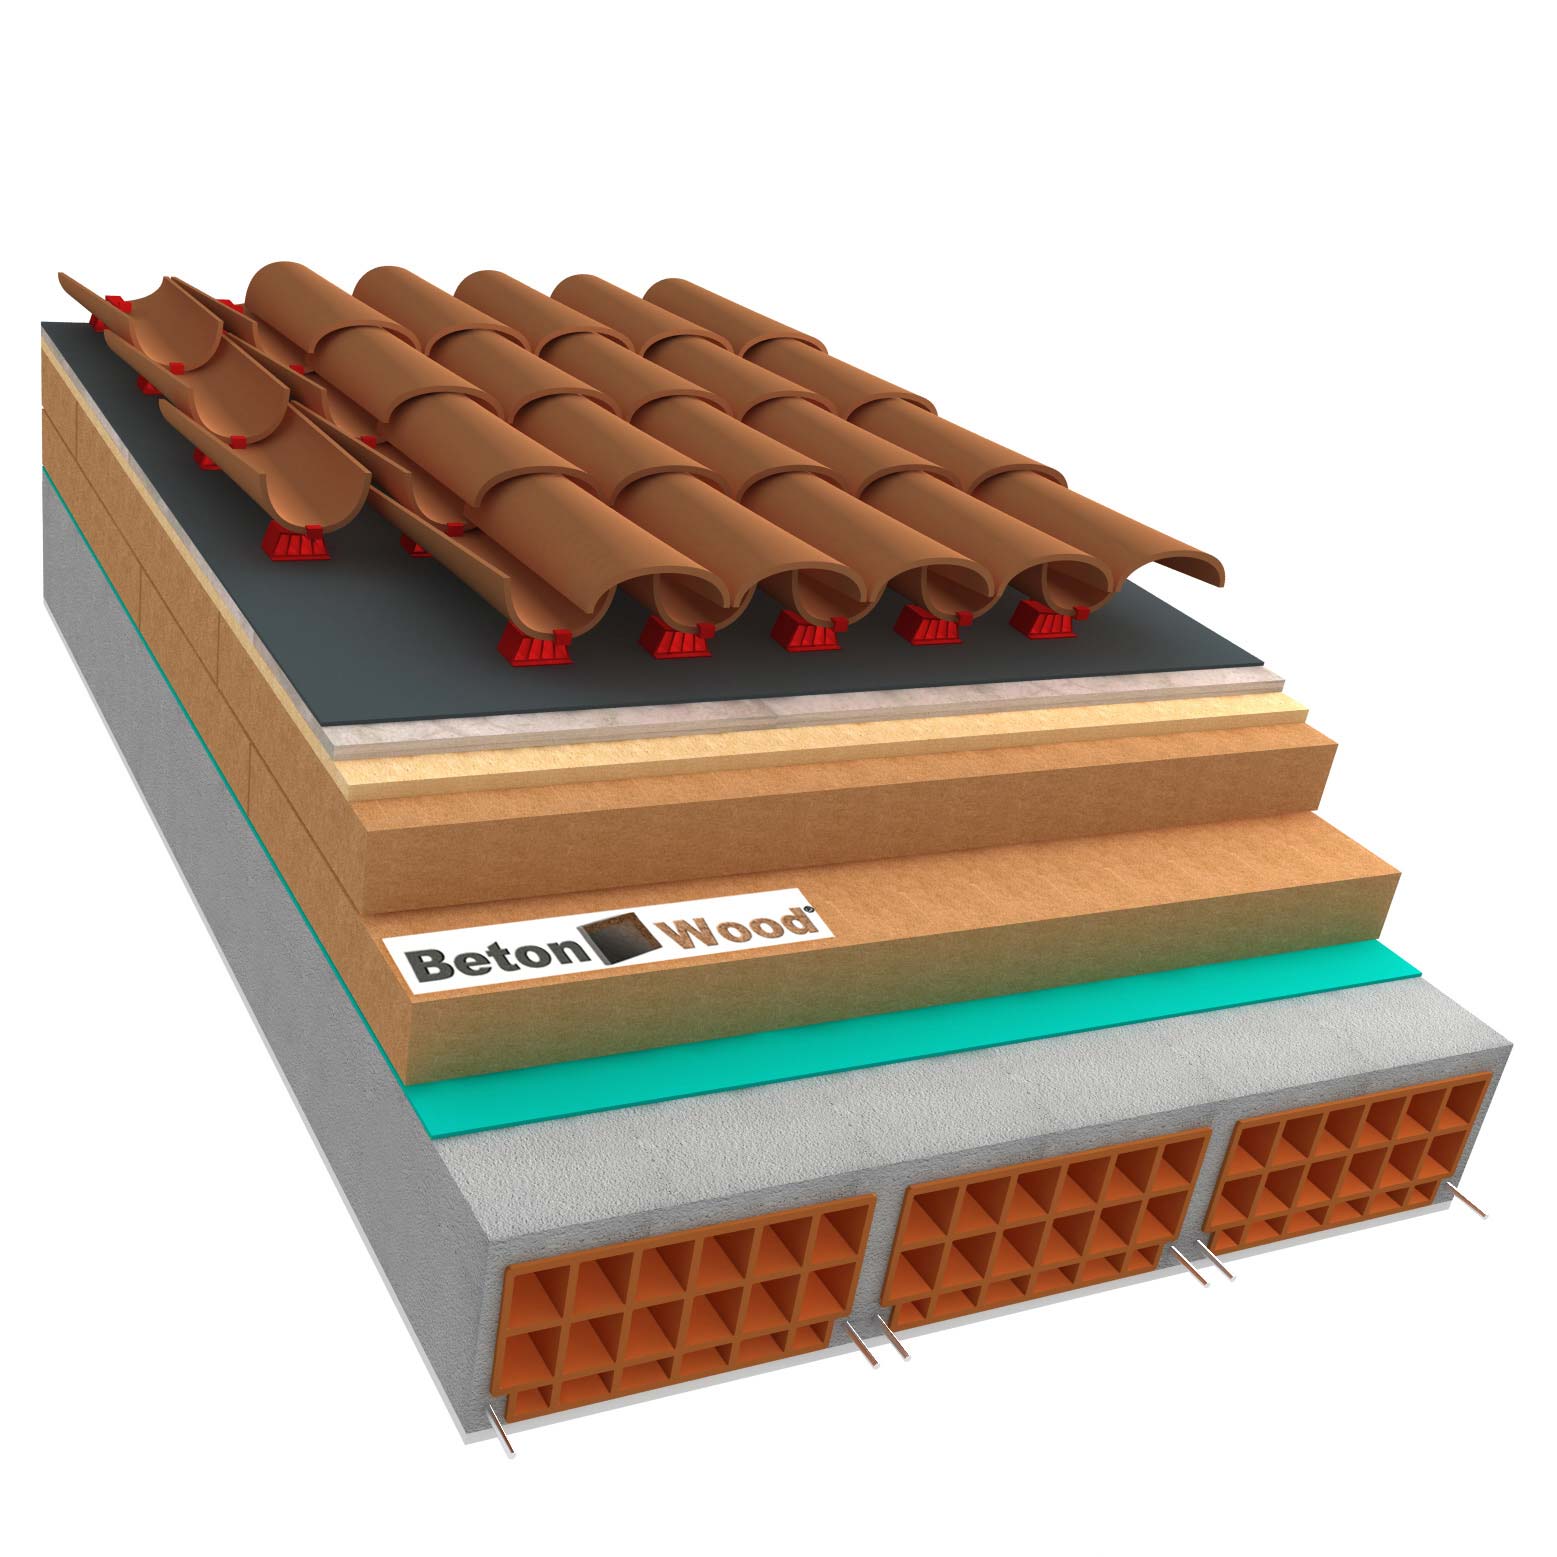 Ventilated roof with wood fiber Isorel, Therm and cement bonded particle boards on concrete